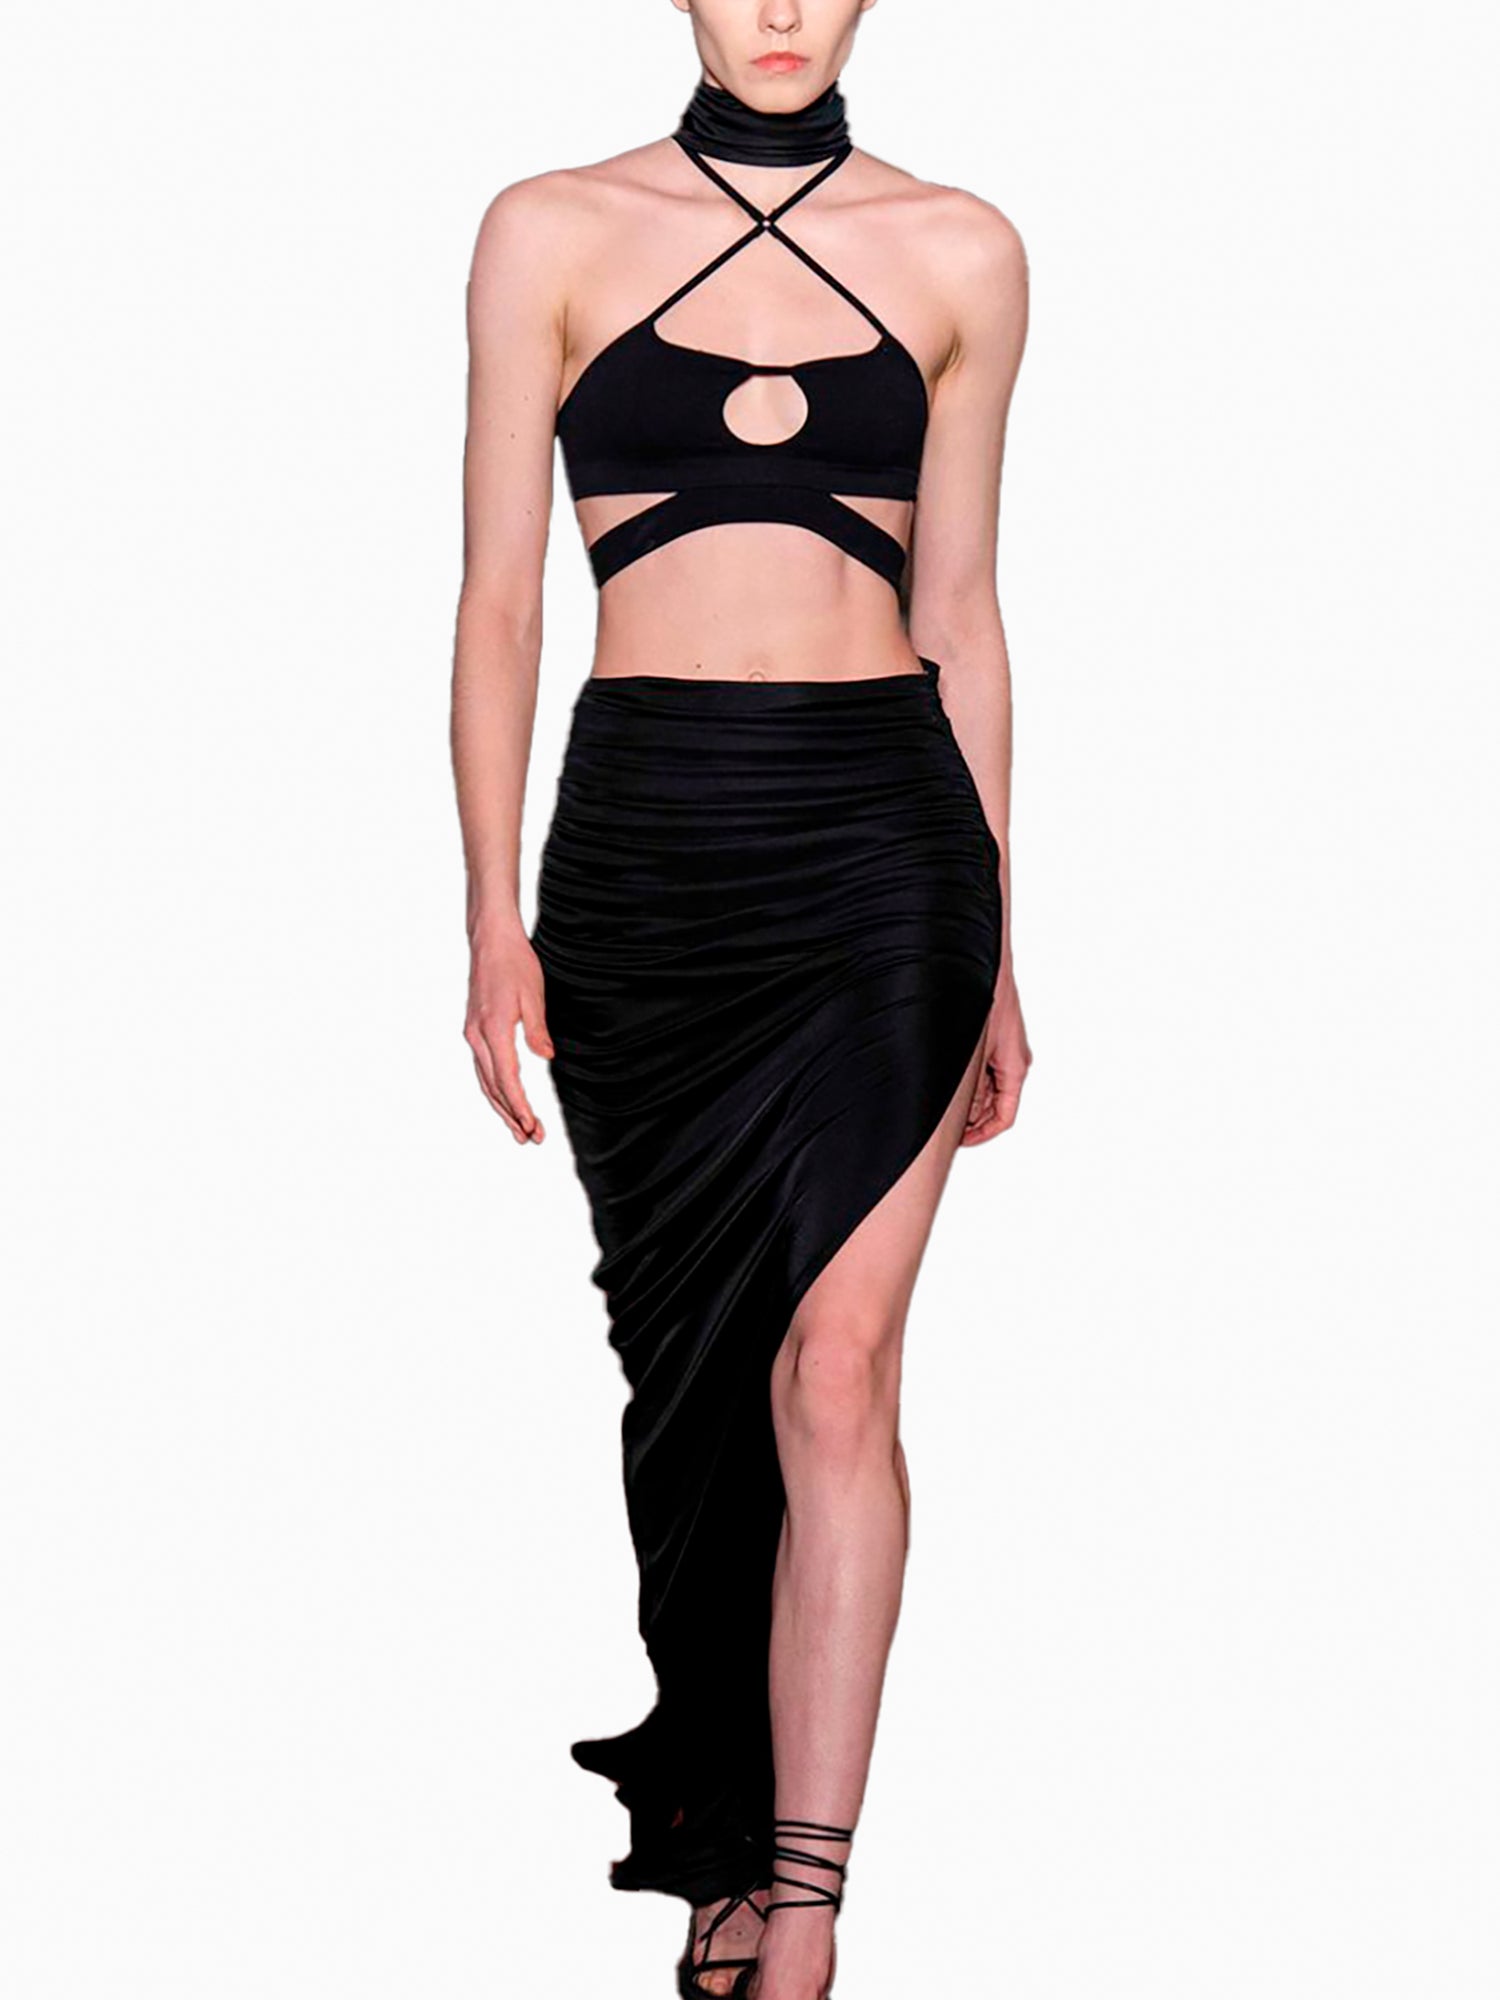 ANDREA ADAMO Ribbed Jersey Bra With Strappy Details